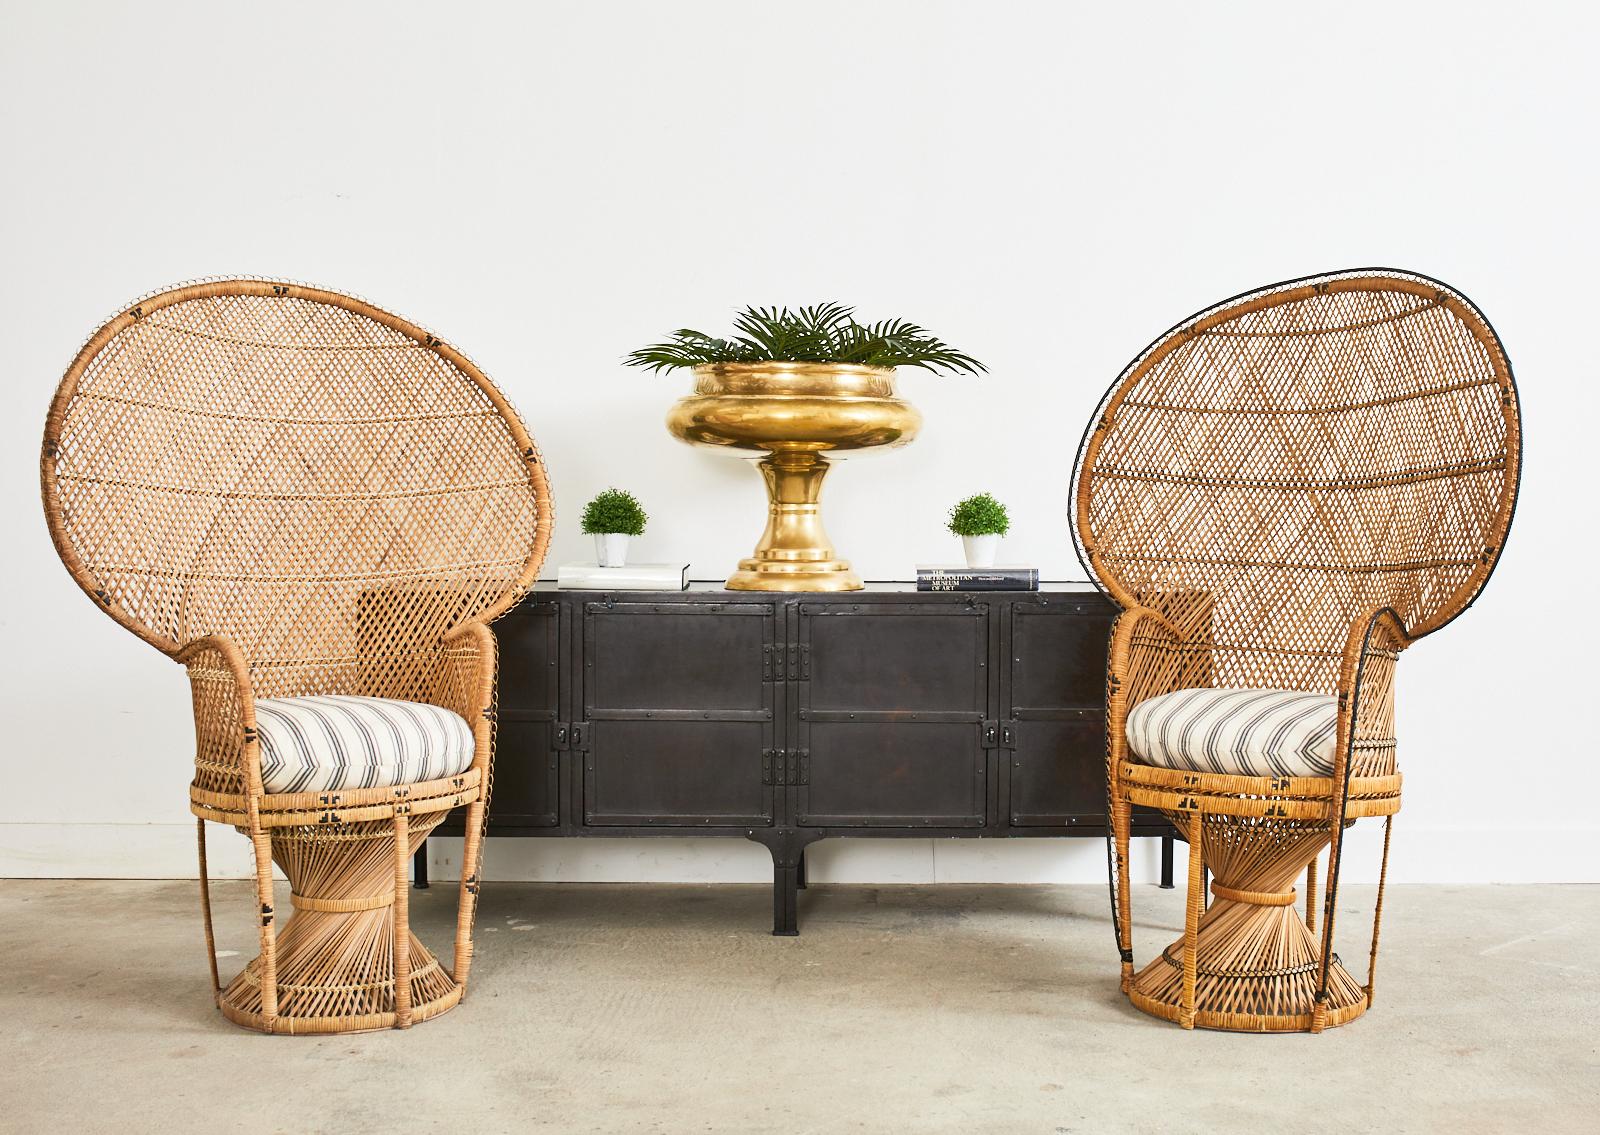 Iconic Mid-Century Modern near pair of French Bohemian Emmanuelle peacock chairs. Crafted from woven rattan wicker with subtle yin-yang style differences. One chair has a black outline and black woven wicker thread. The other chair has white thread